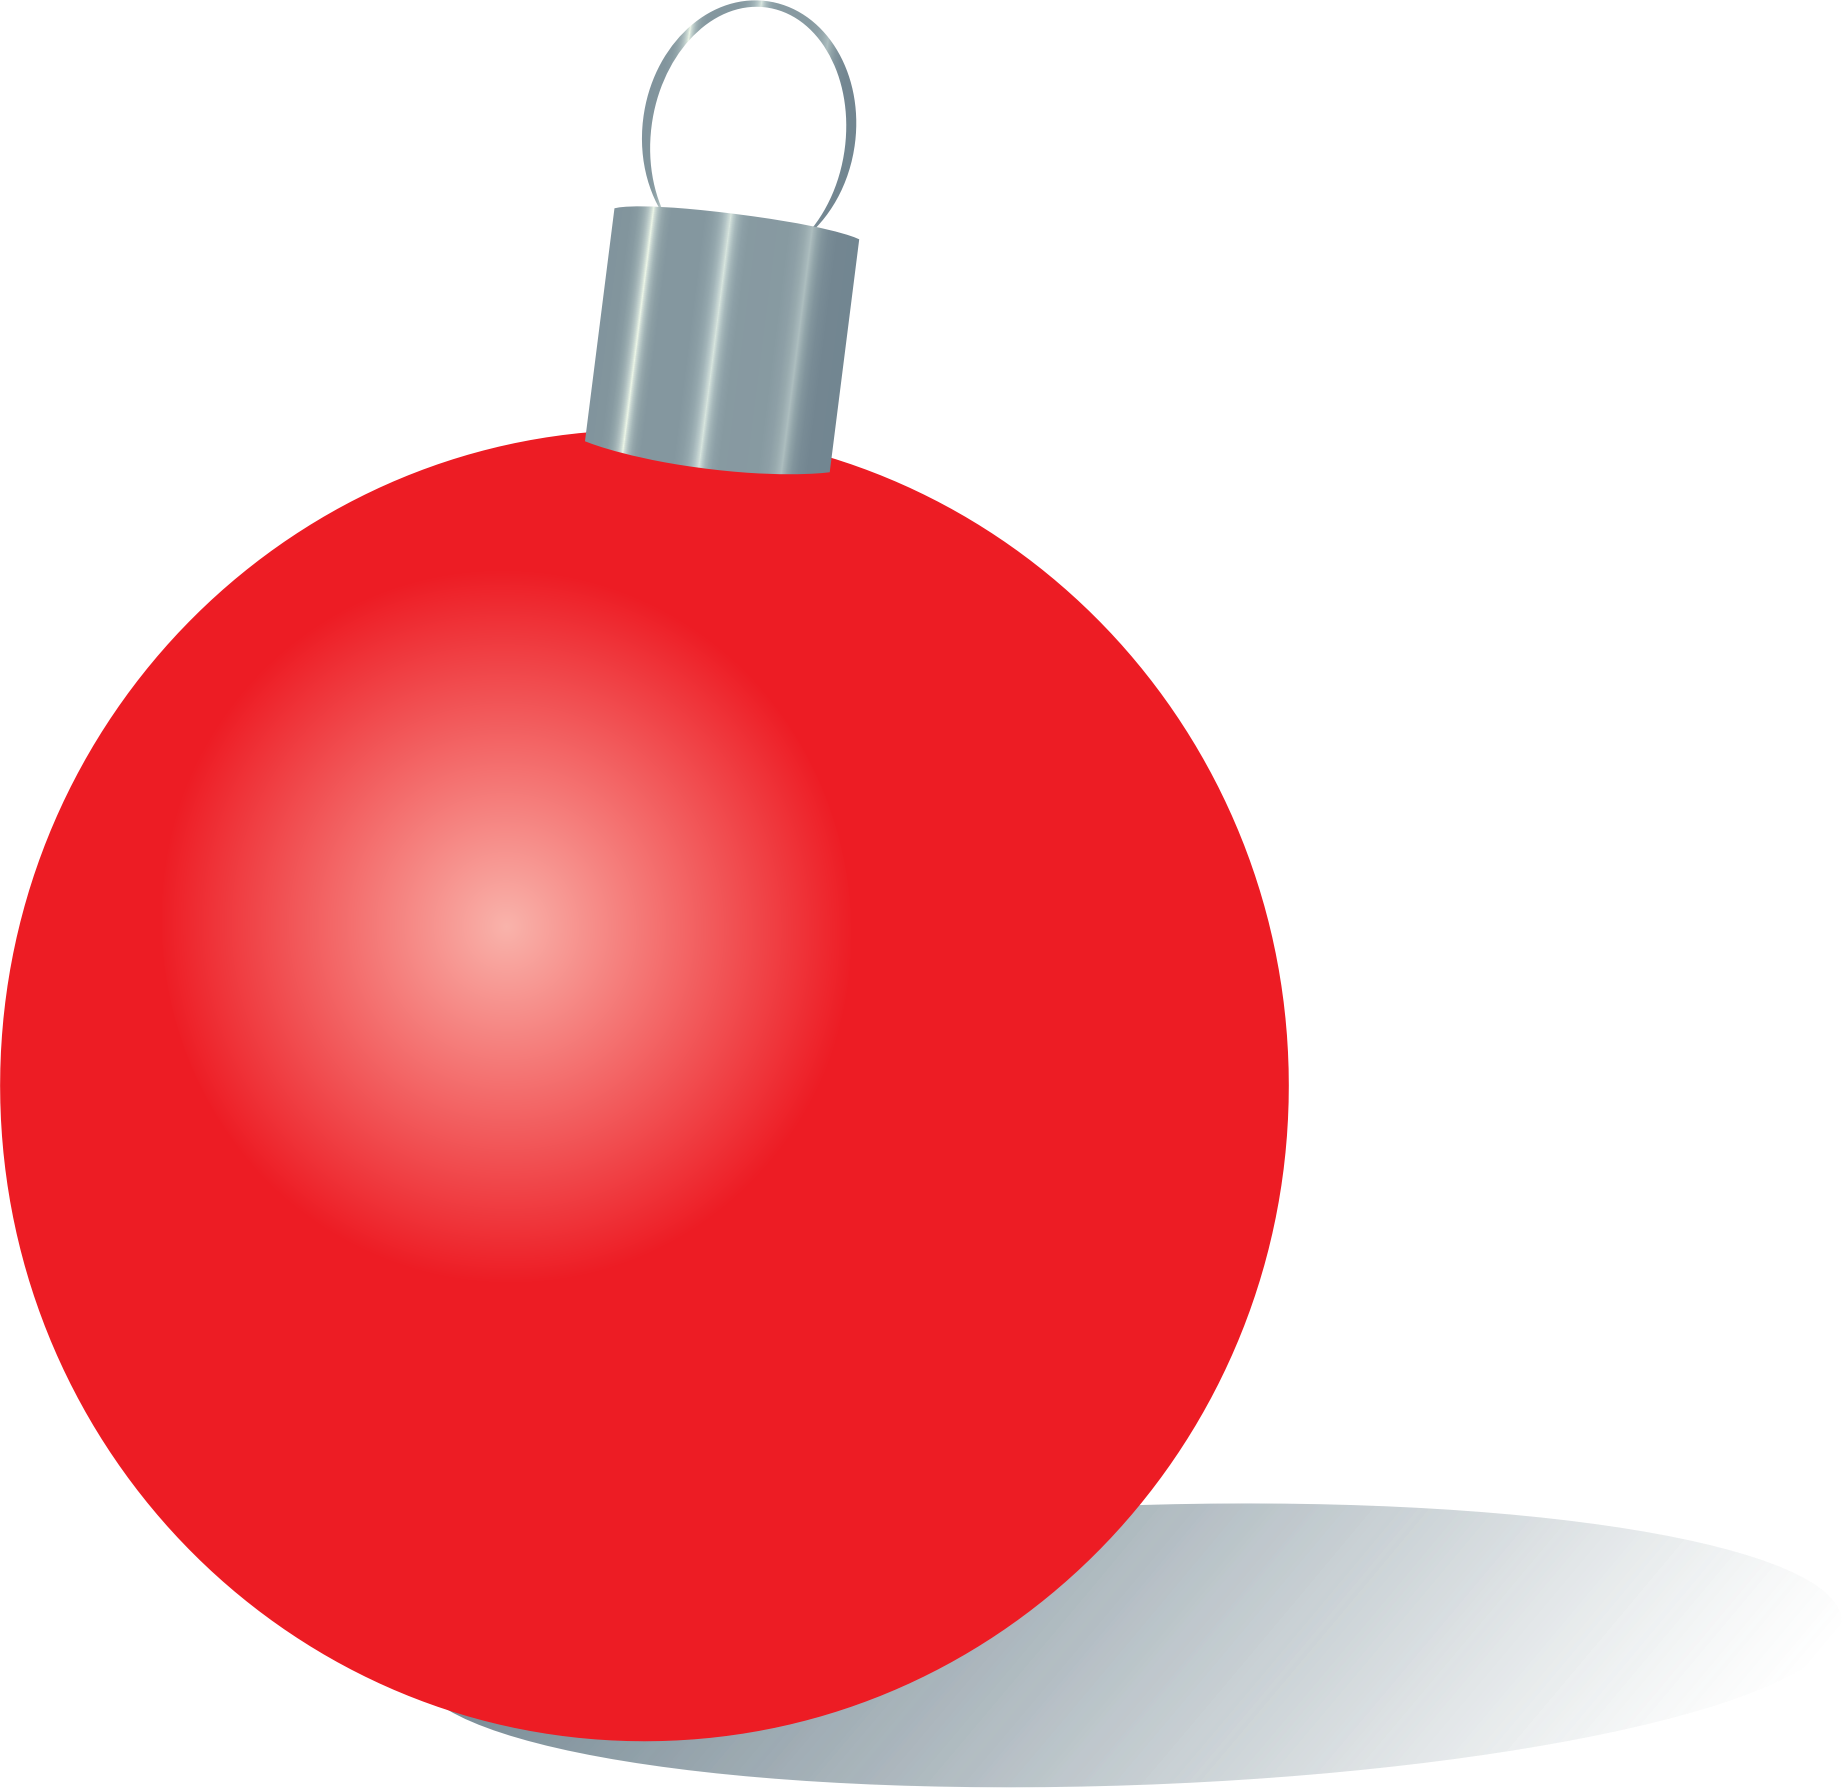 Clip Royalty Free Download Red Christmas Ornaments.